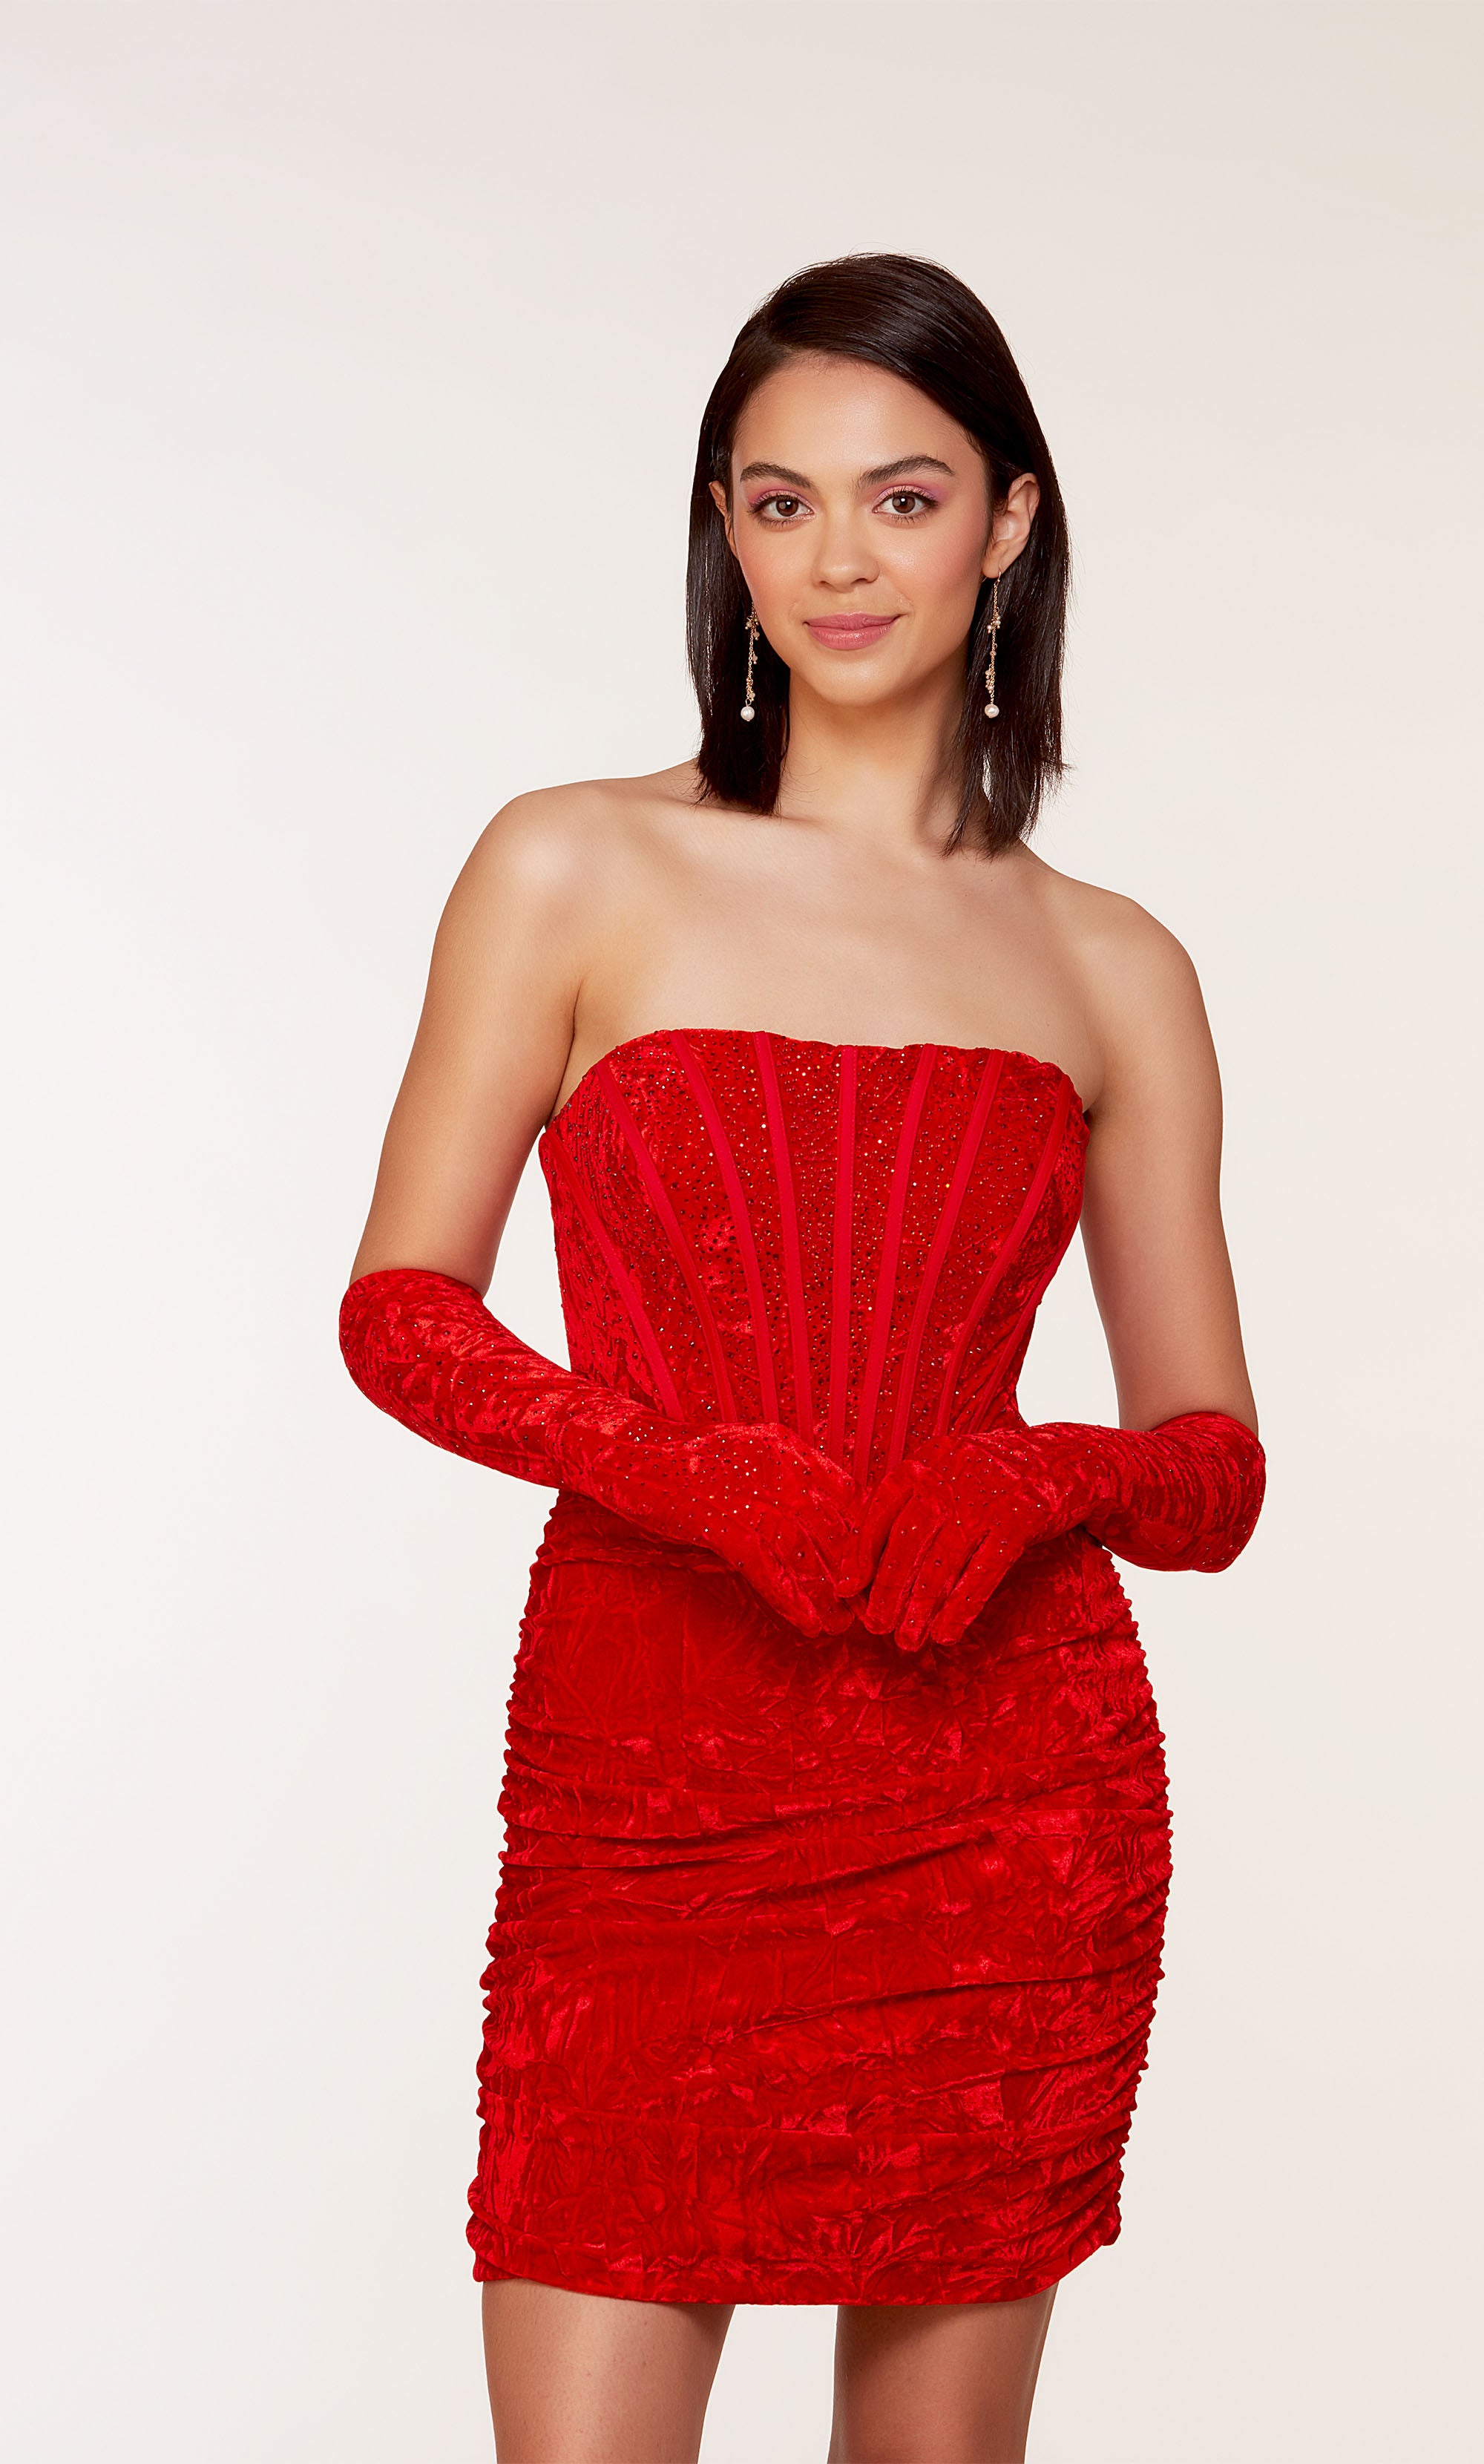 An 80's inspired red velvet corset dress with a strapless neckline and a ruched skirt. The matching gloves level up this chic look.